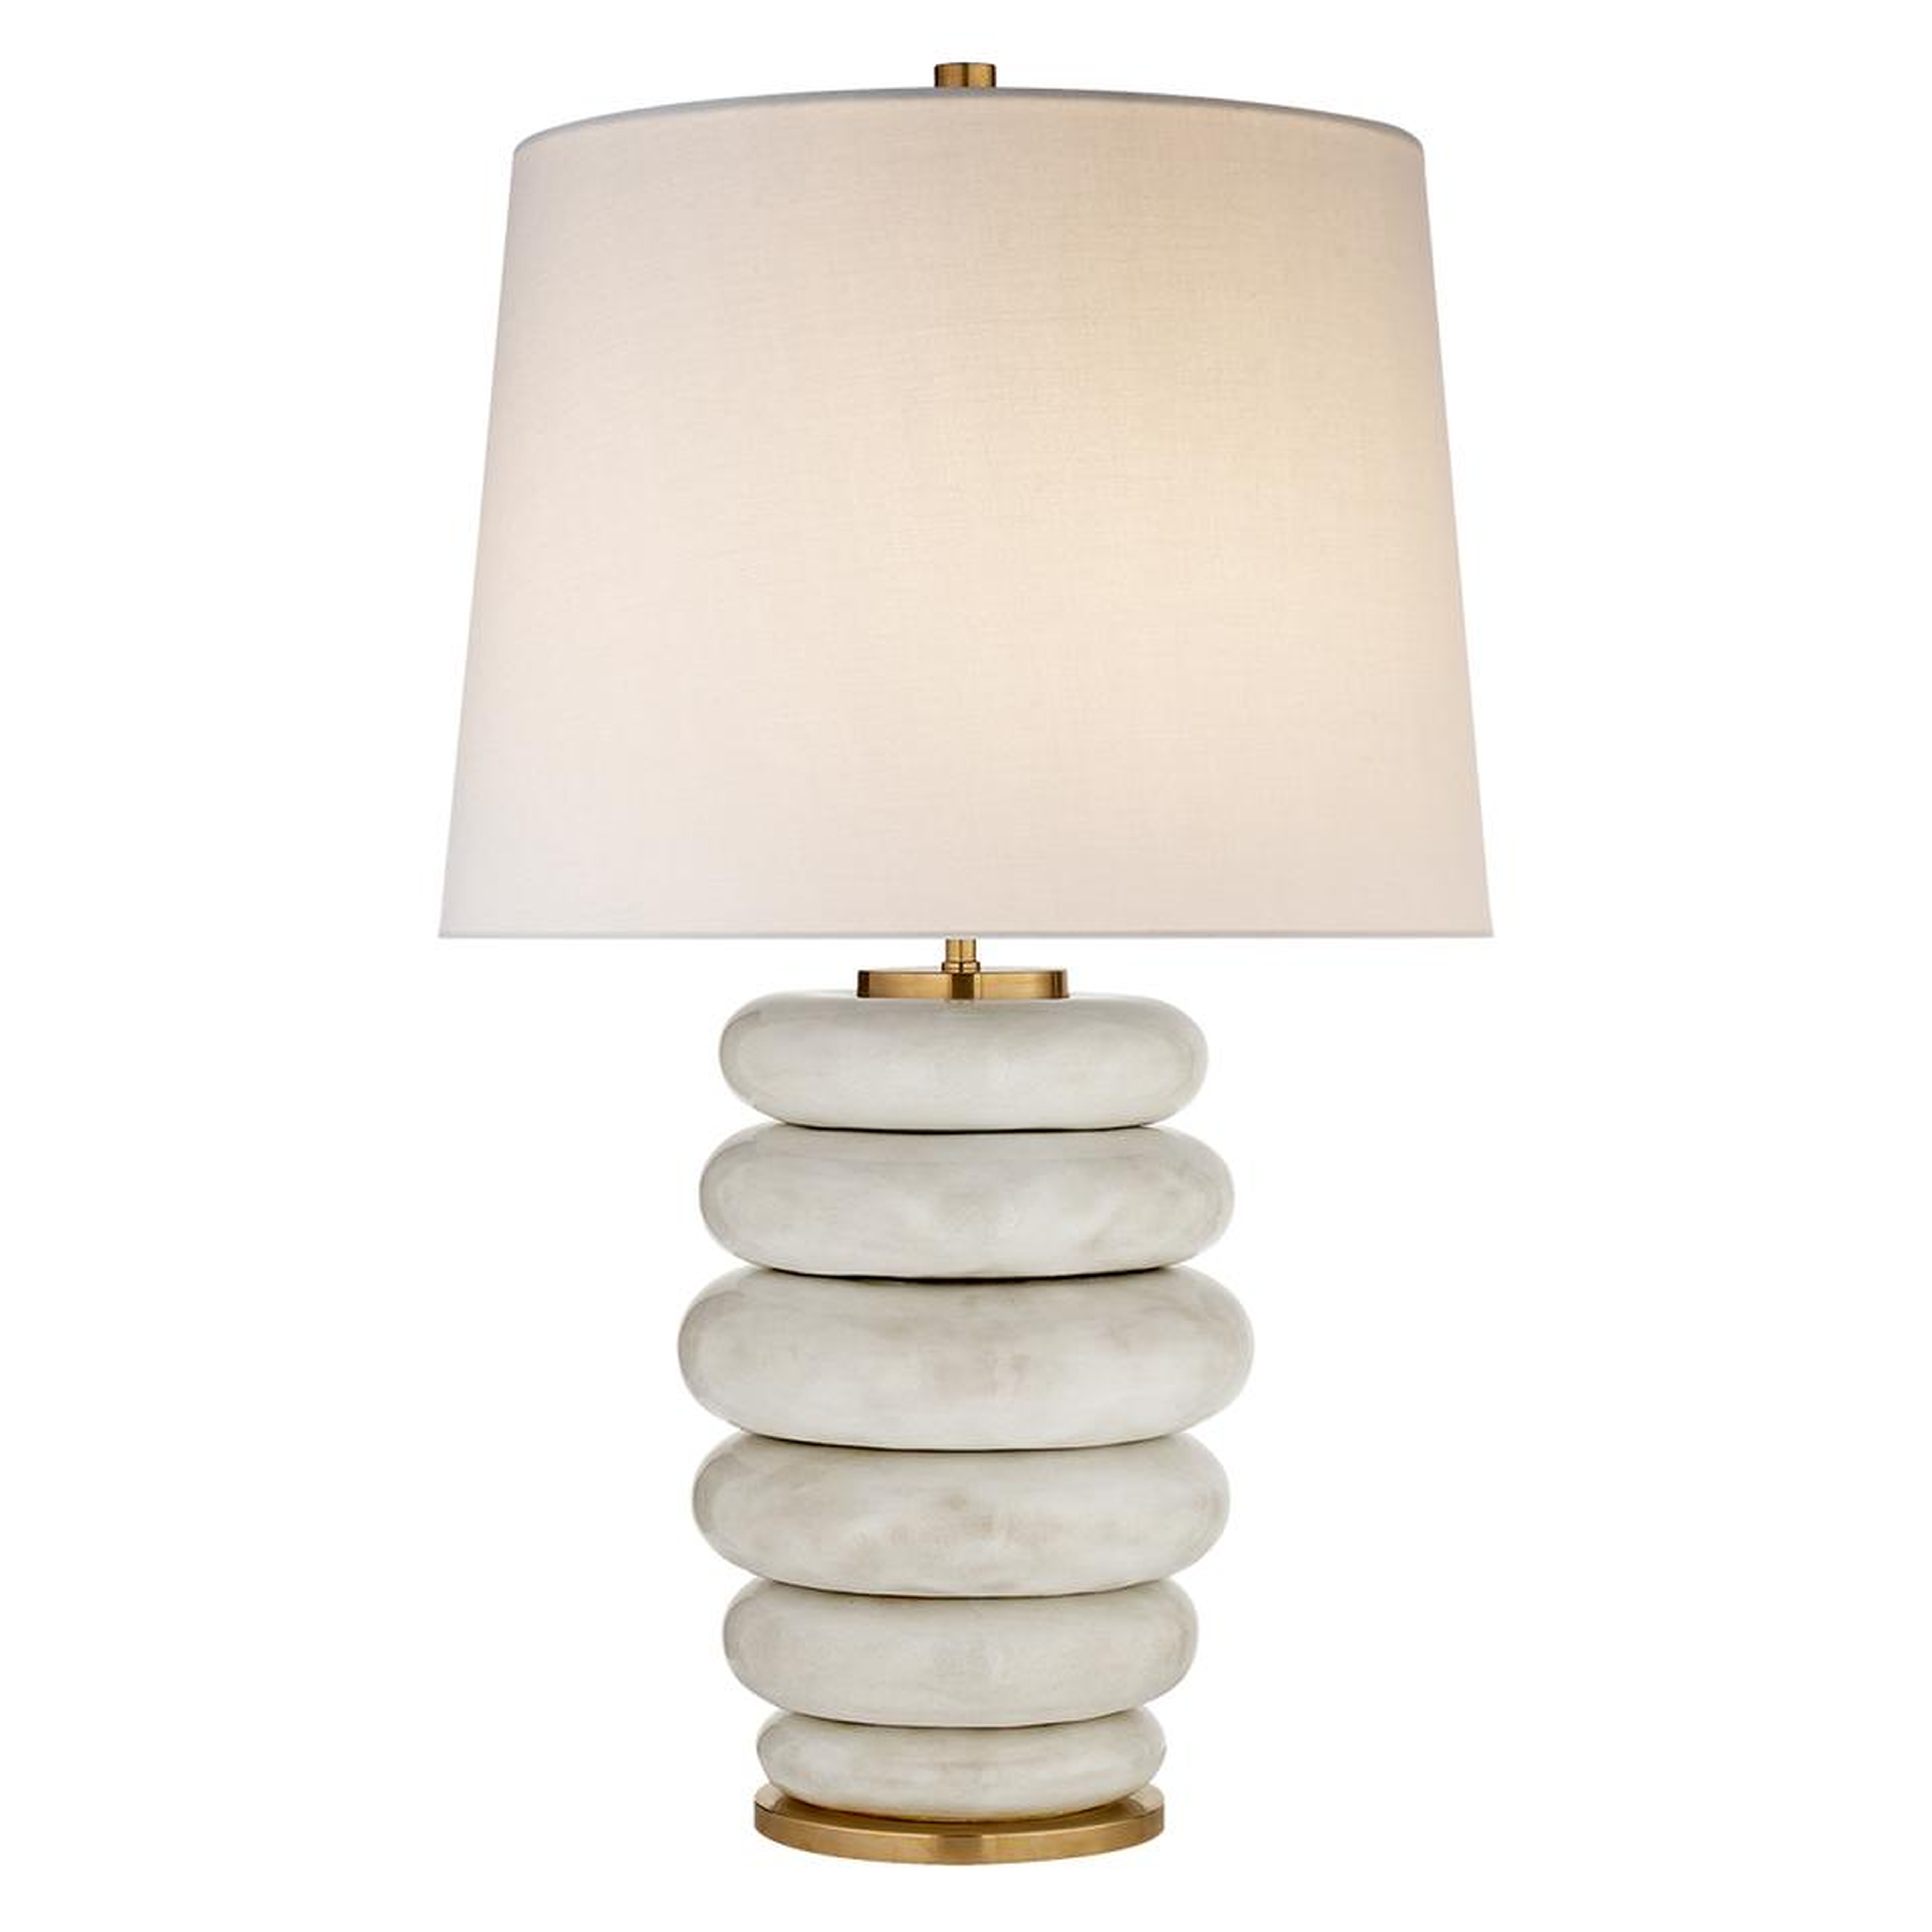 PHOEBE STACKED TABLE LAMP - ANTIQUED WHITE CERAMIC - McGee & Co.